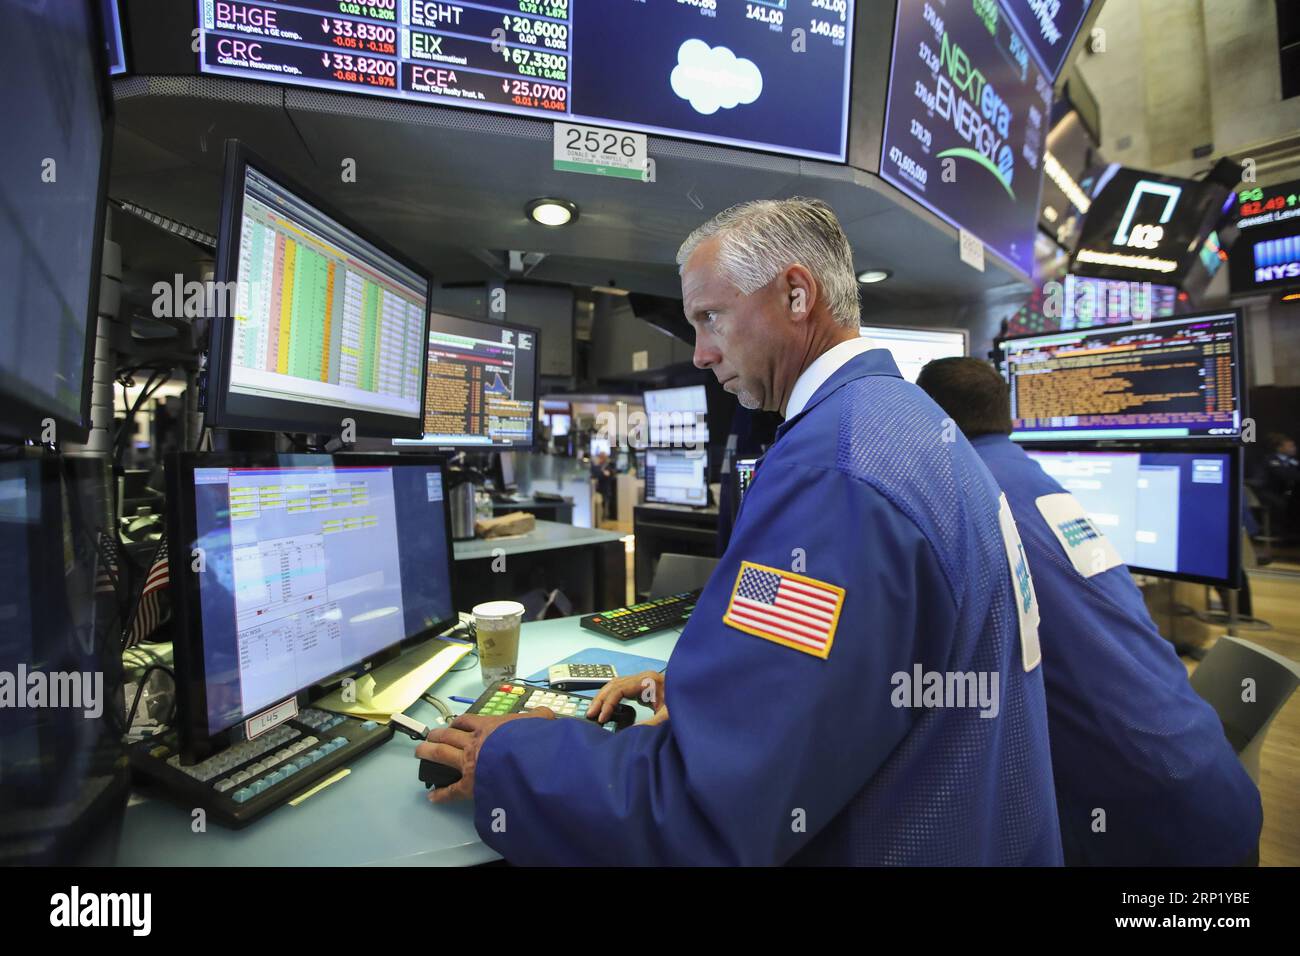 News Bilder des Tages (180806) -- NEW YORK, Aug. 6, 2018 -- Traders work at the New York Stock Exchange in New York, the United States, Aug. 6, 2018. U.S. stocks closed higher on Monday as investors digested a batch of second-quarter corporate earnings reports. The Dow Jones Industrial Average rose 39.60 points, or 0.16 percent, to 25,502.18. The S&P 500 increased 10.05 points, or 0.35 percent, to 2,850.40. The Nasdaq Composite Index rose 47.66 points, or 0.61 percent, to 7,859.68. ) U.S.-NEW YORK-STOCKS WangxYing PUBLICATIONxNOTxINxCHN Stock Photo